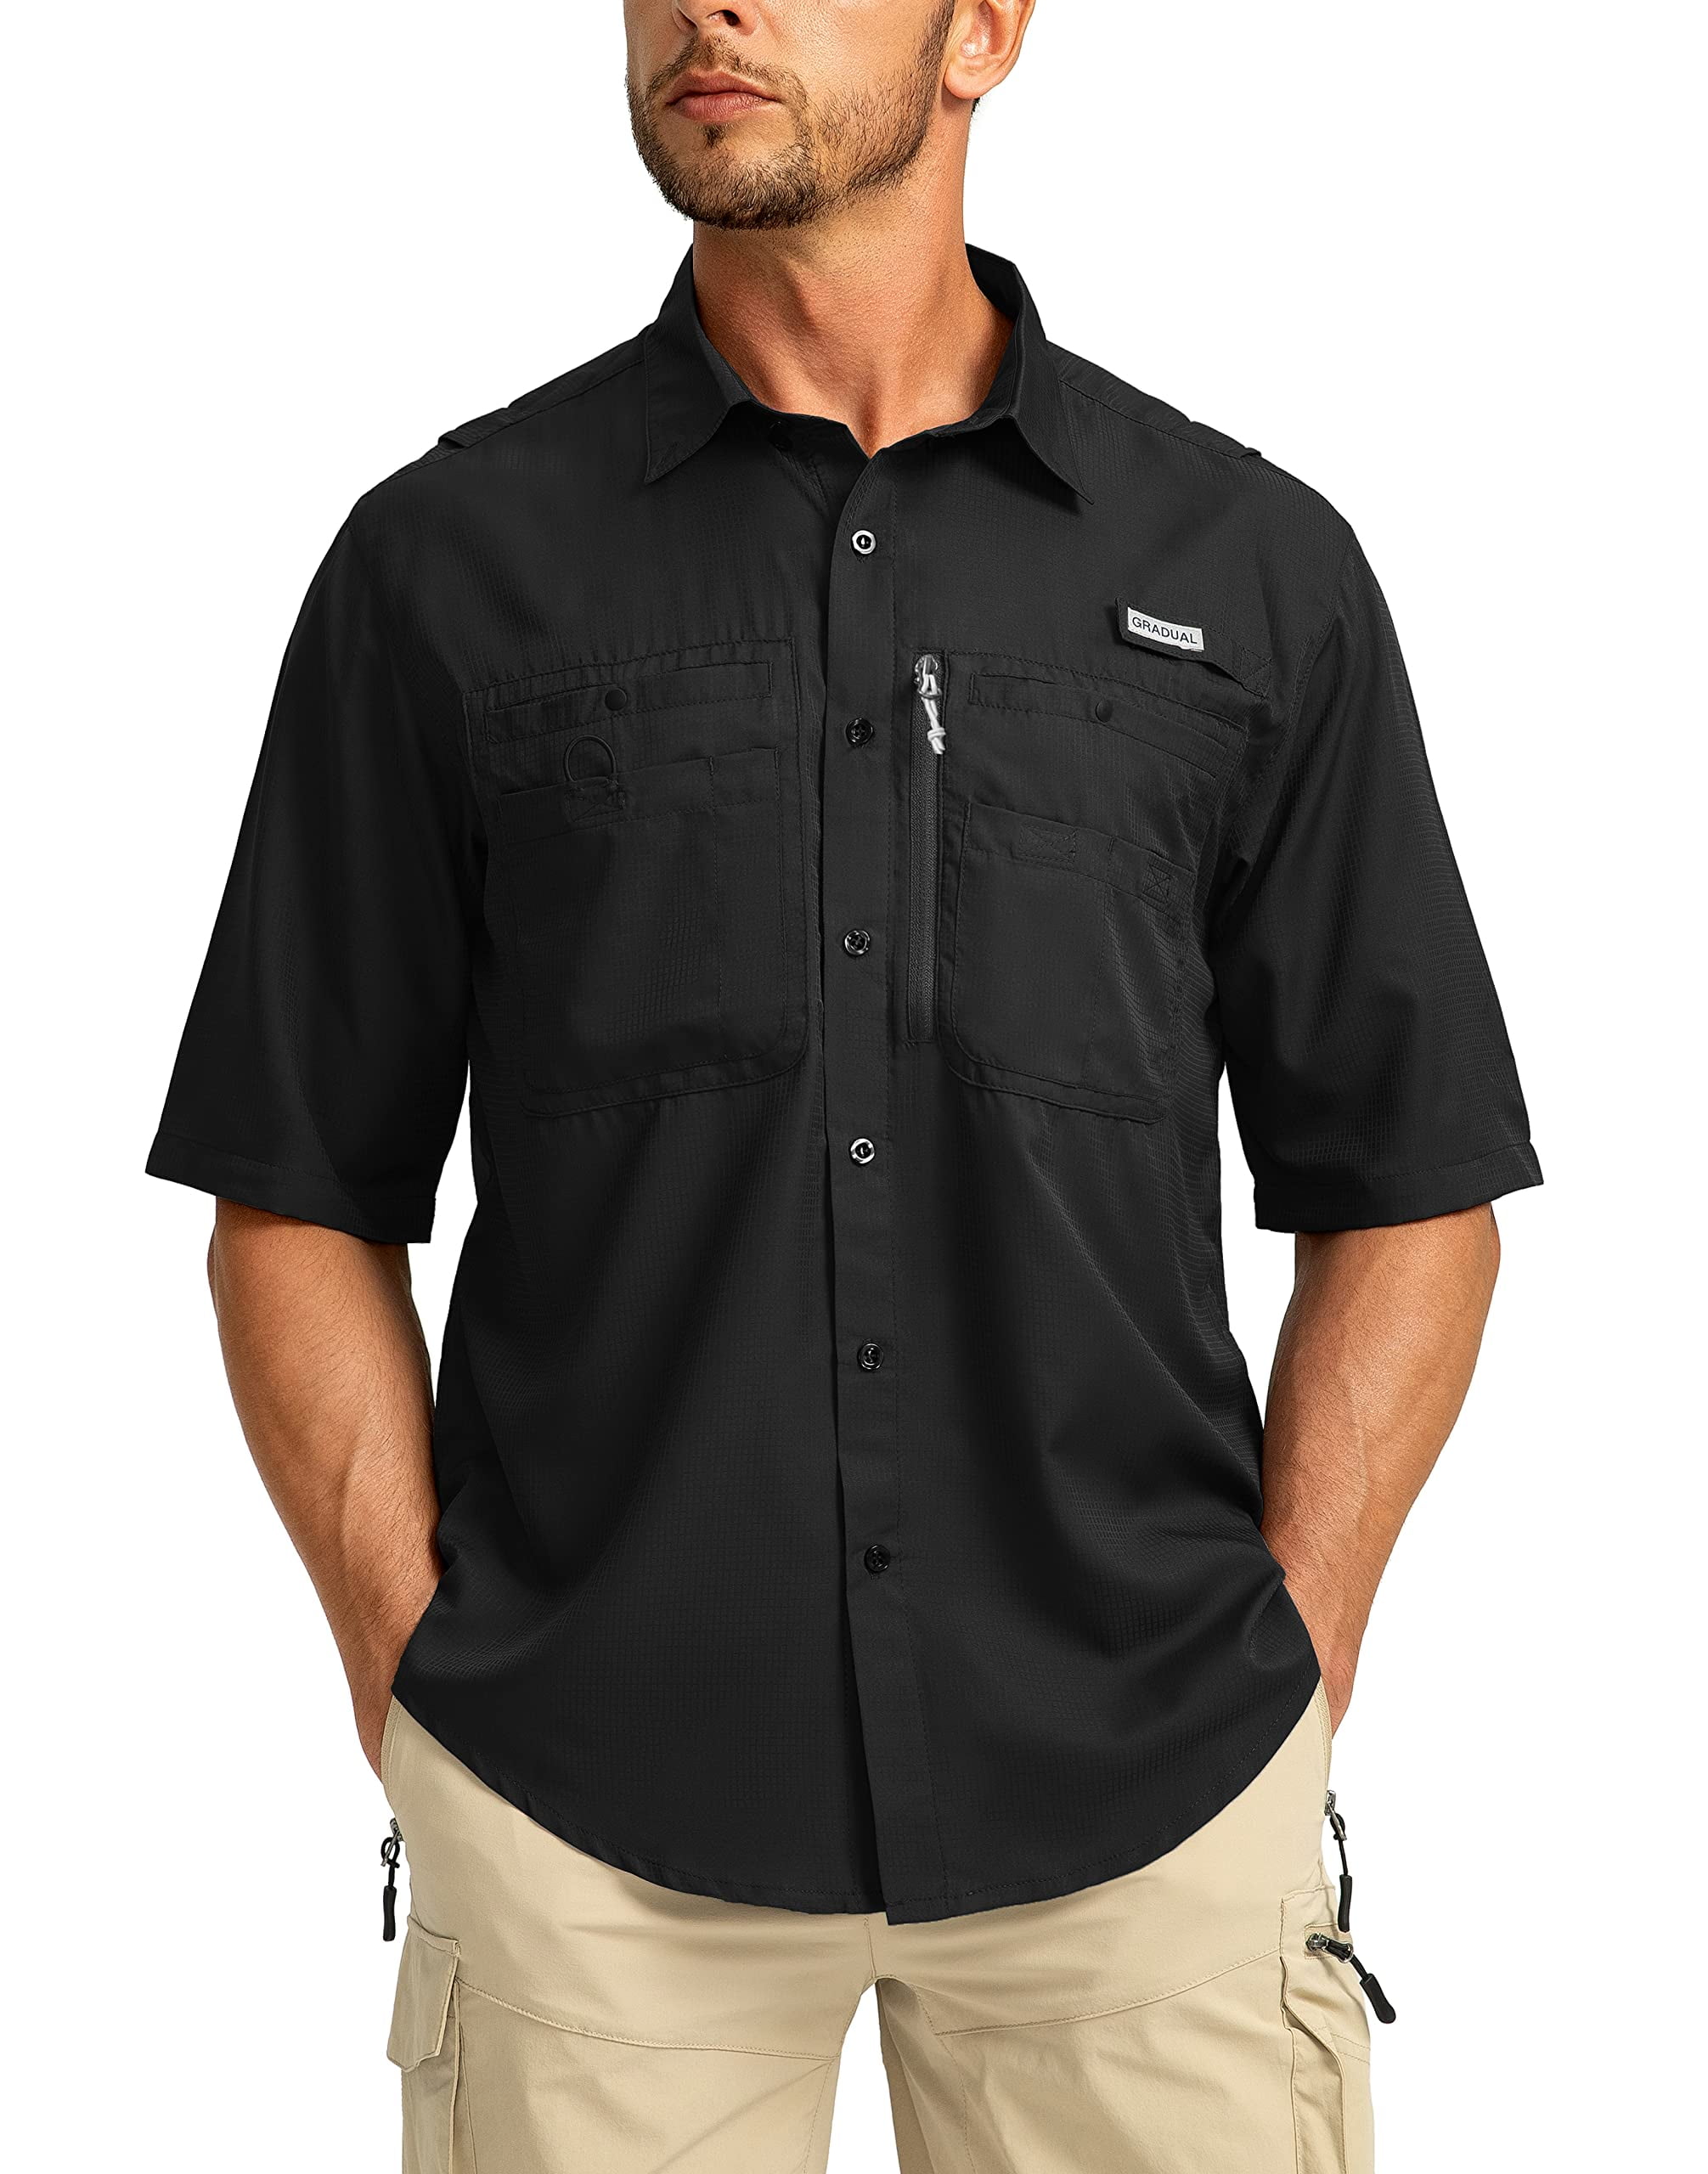 Men's Fishing Shirts with Zipper Pockets UPF 50+ Lightweight Cool Short  Sleeve Button Down Shirts for Men Casual Hiking(Black, Large) 